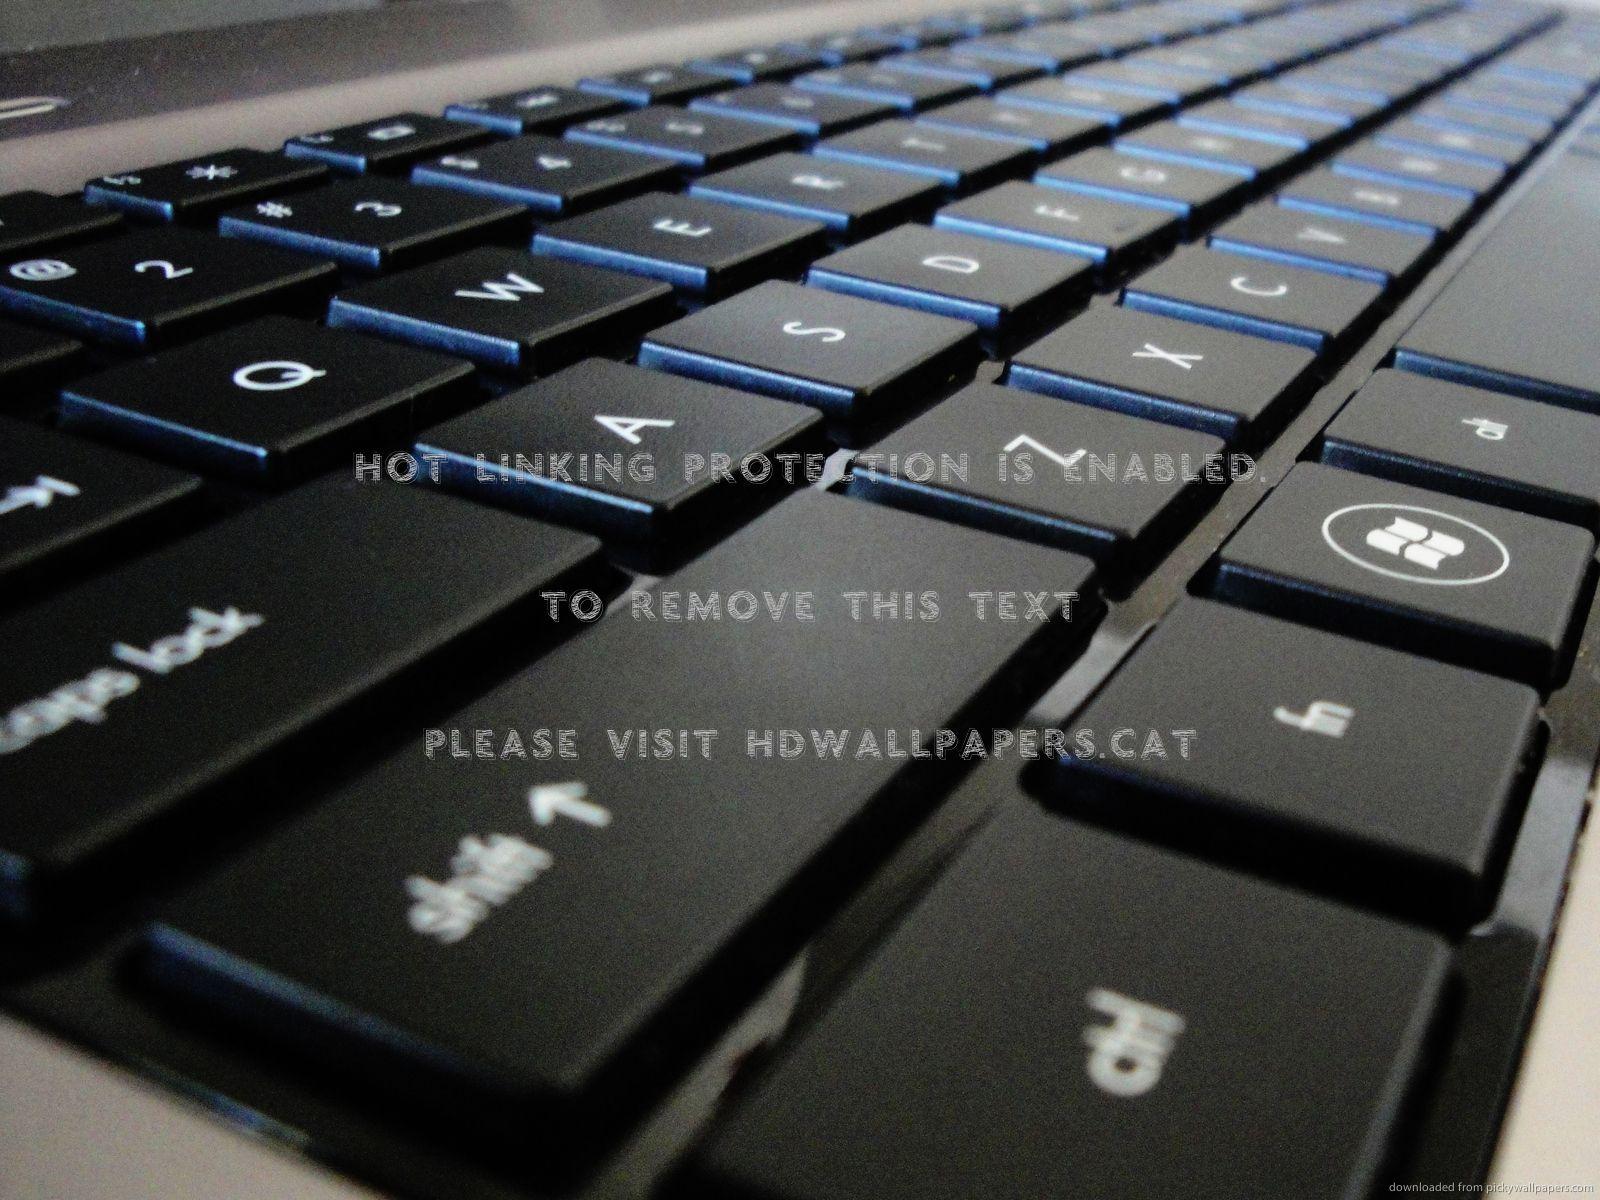 This keyboard is a FULL computer! And it costs almost Rs. 11000 | Laptops-pc  News